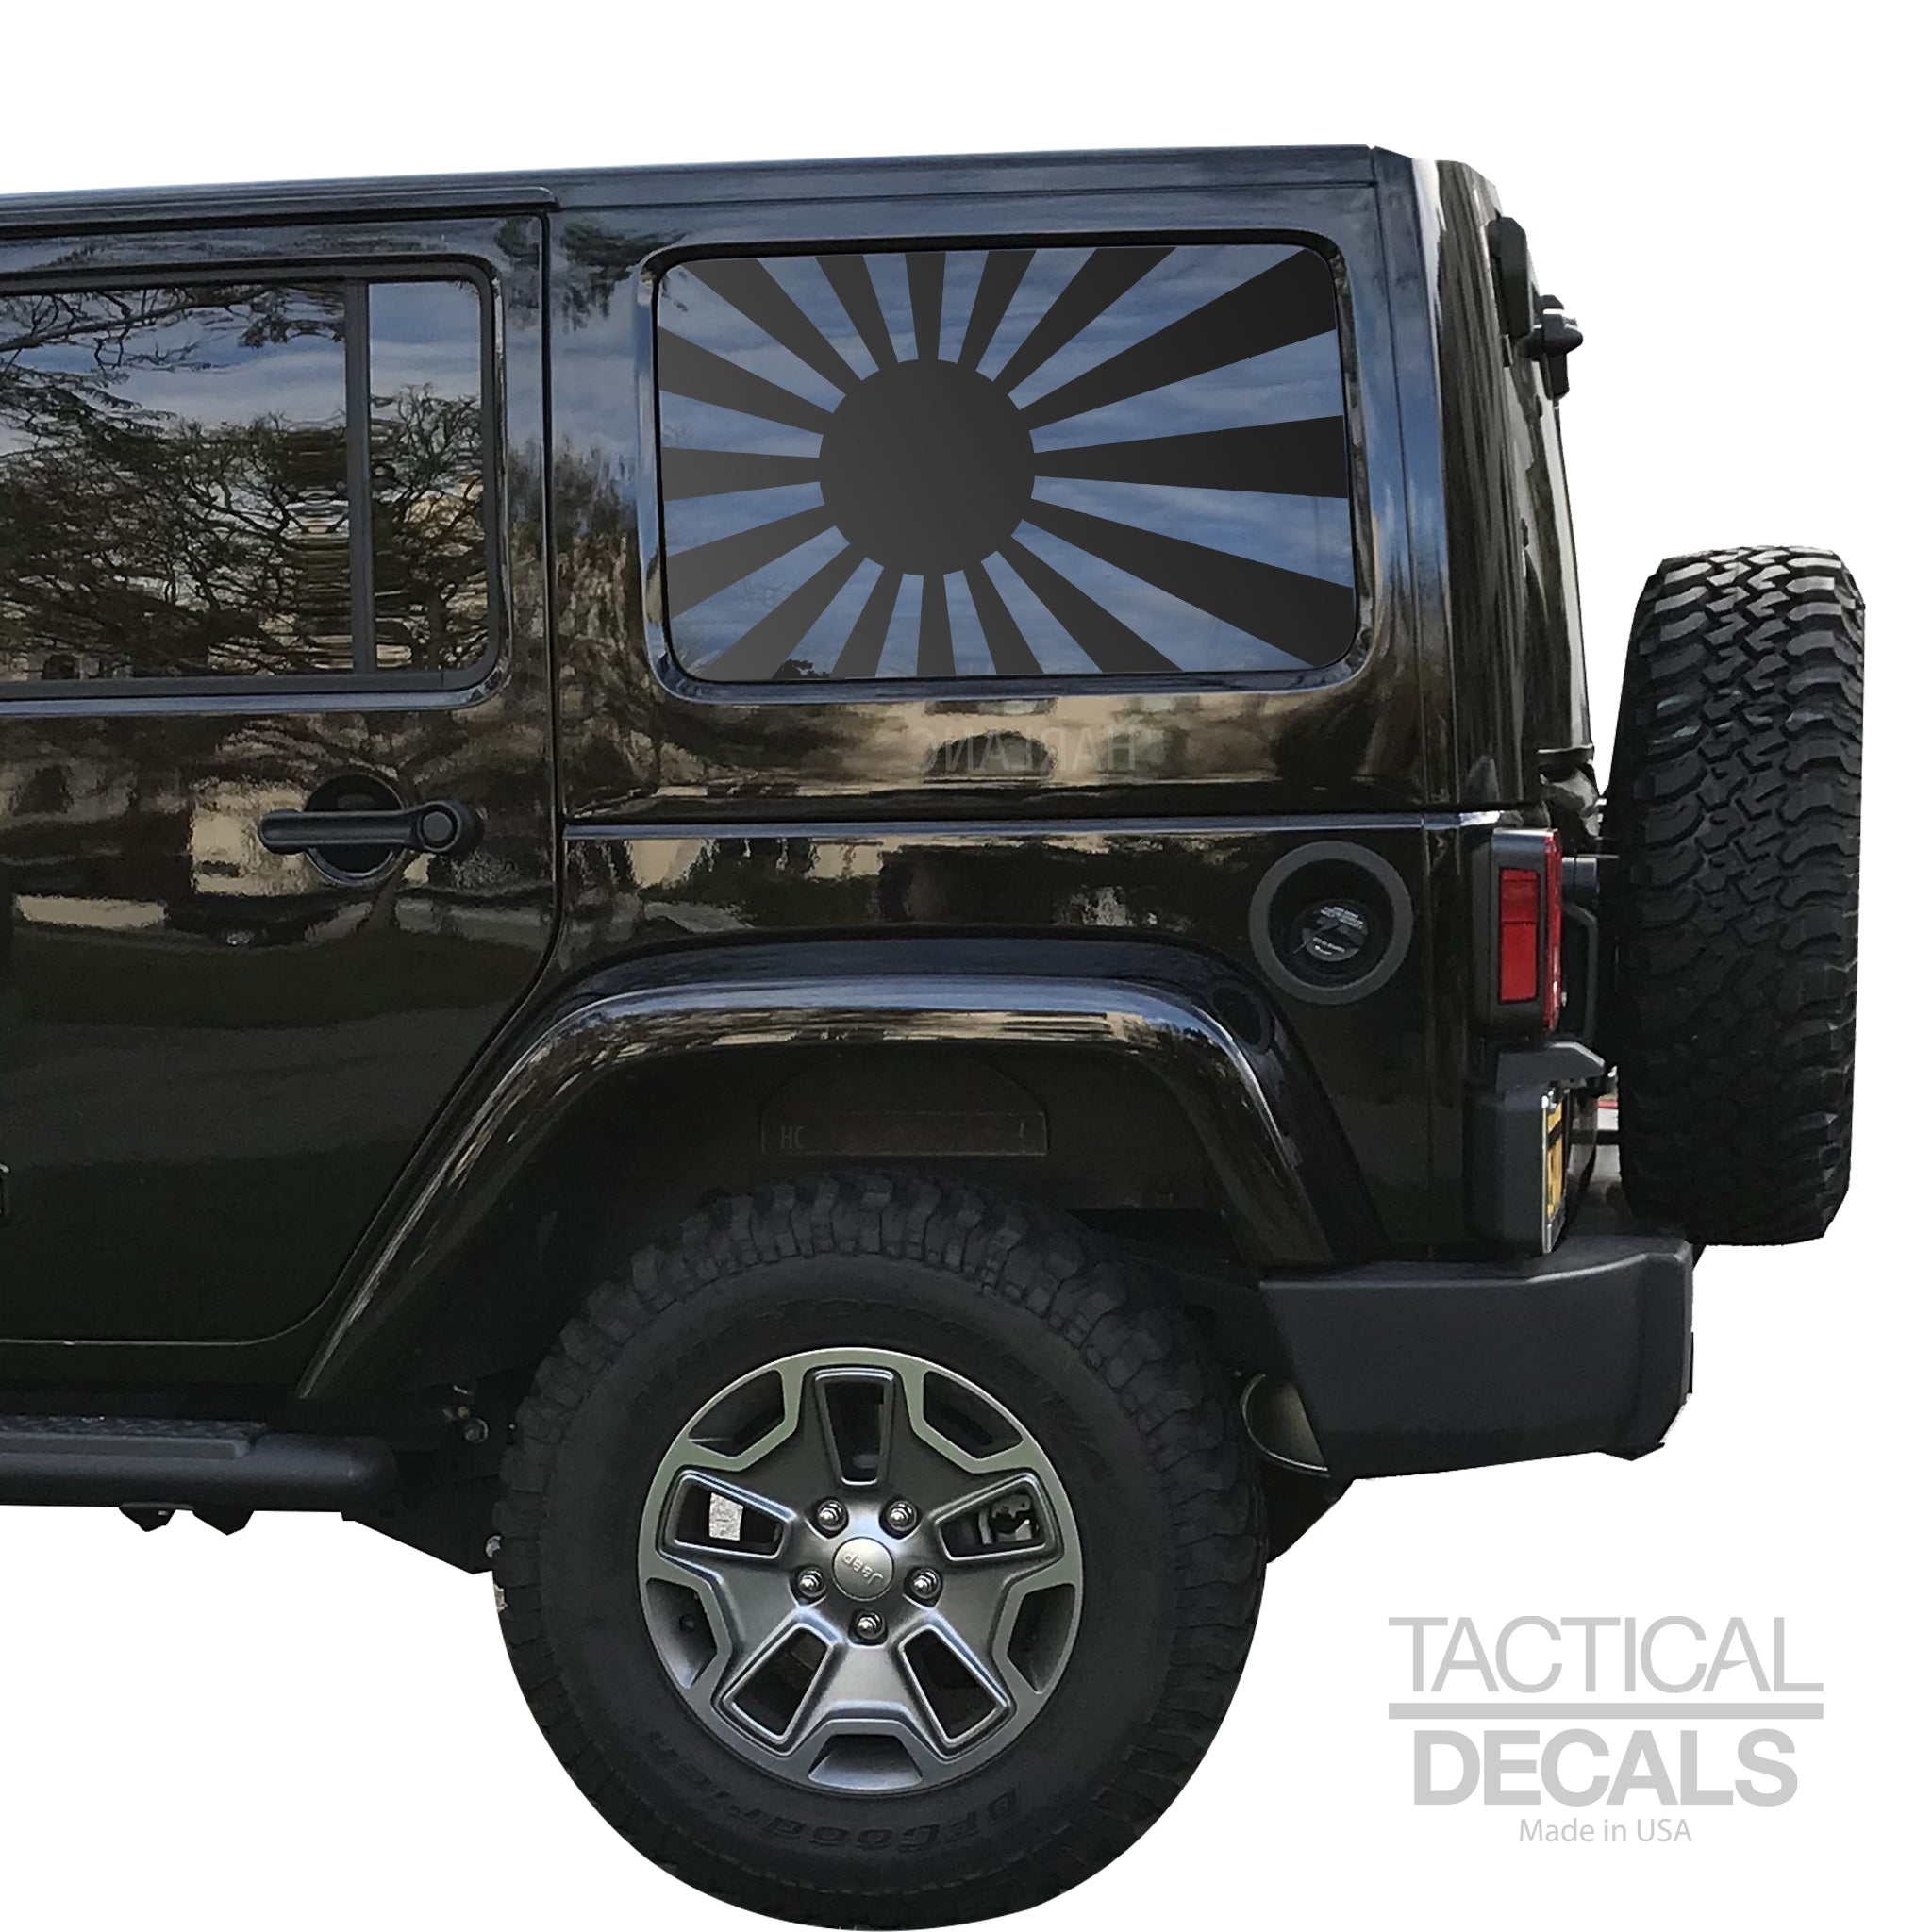 Rising Sun Flag Decal for 2007 - 2024 Jeep Wrangler 4 Door only